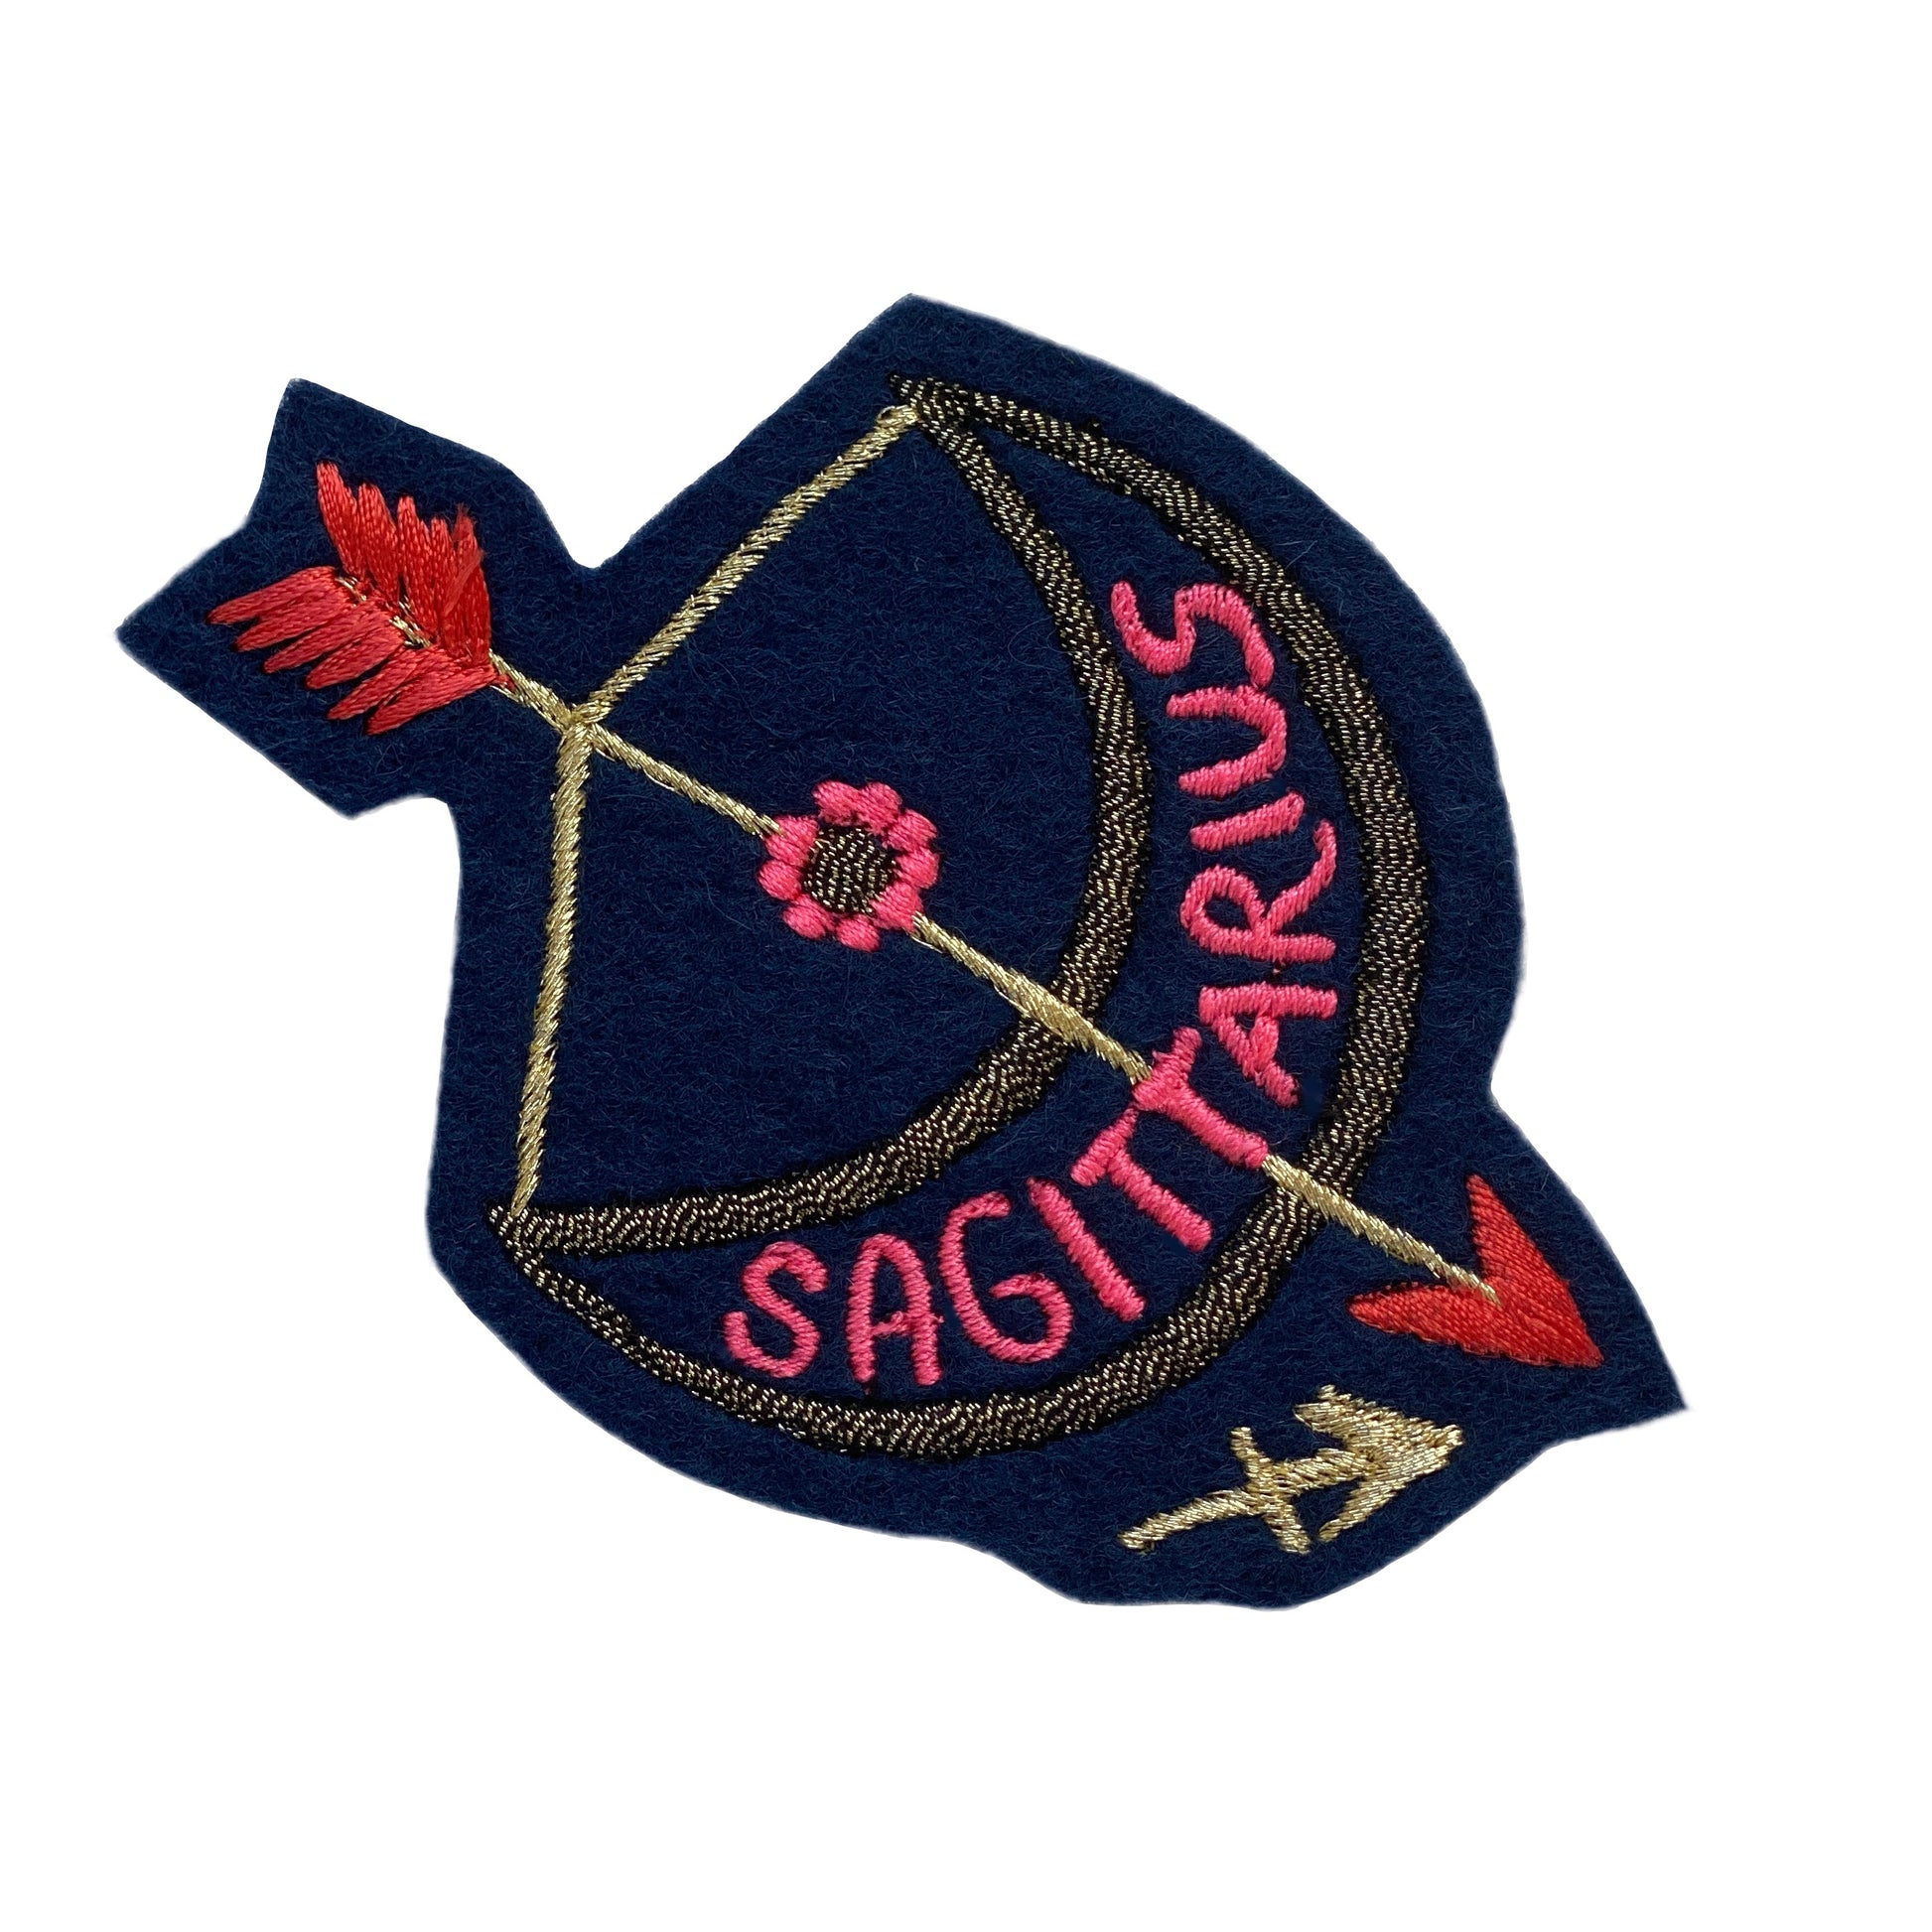 Sagittarius embroidered patch on white background